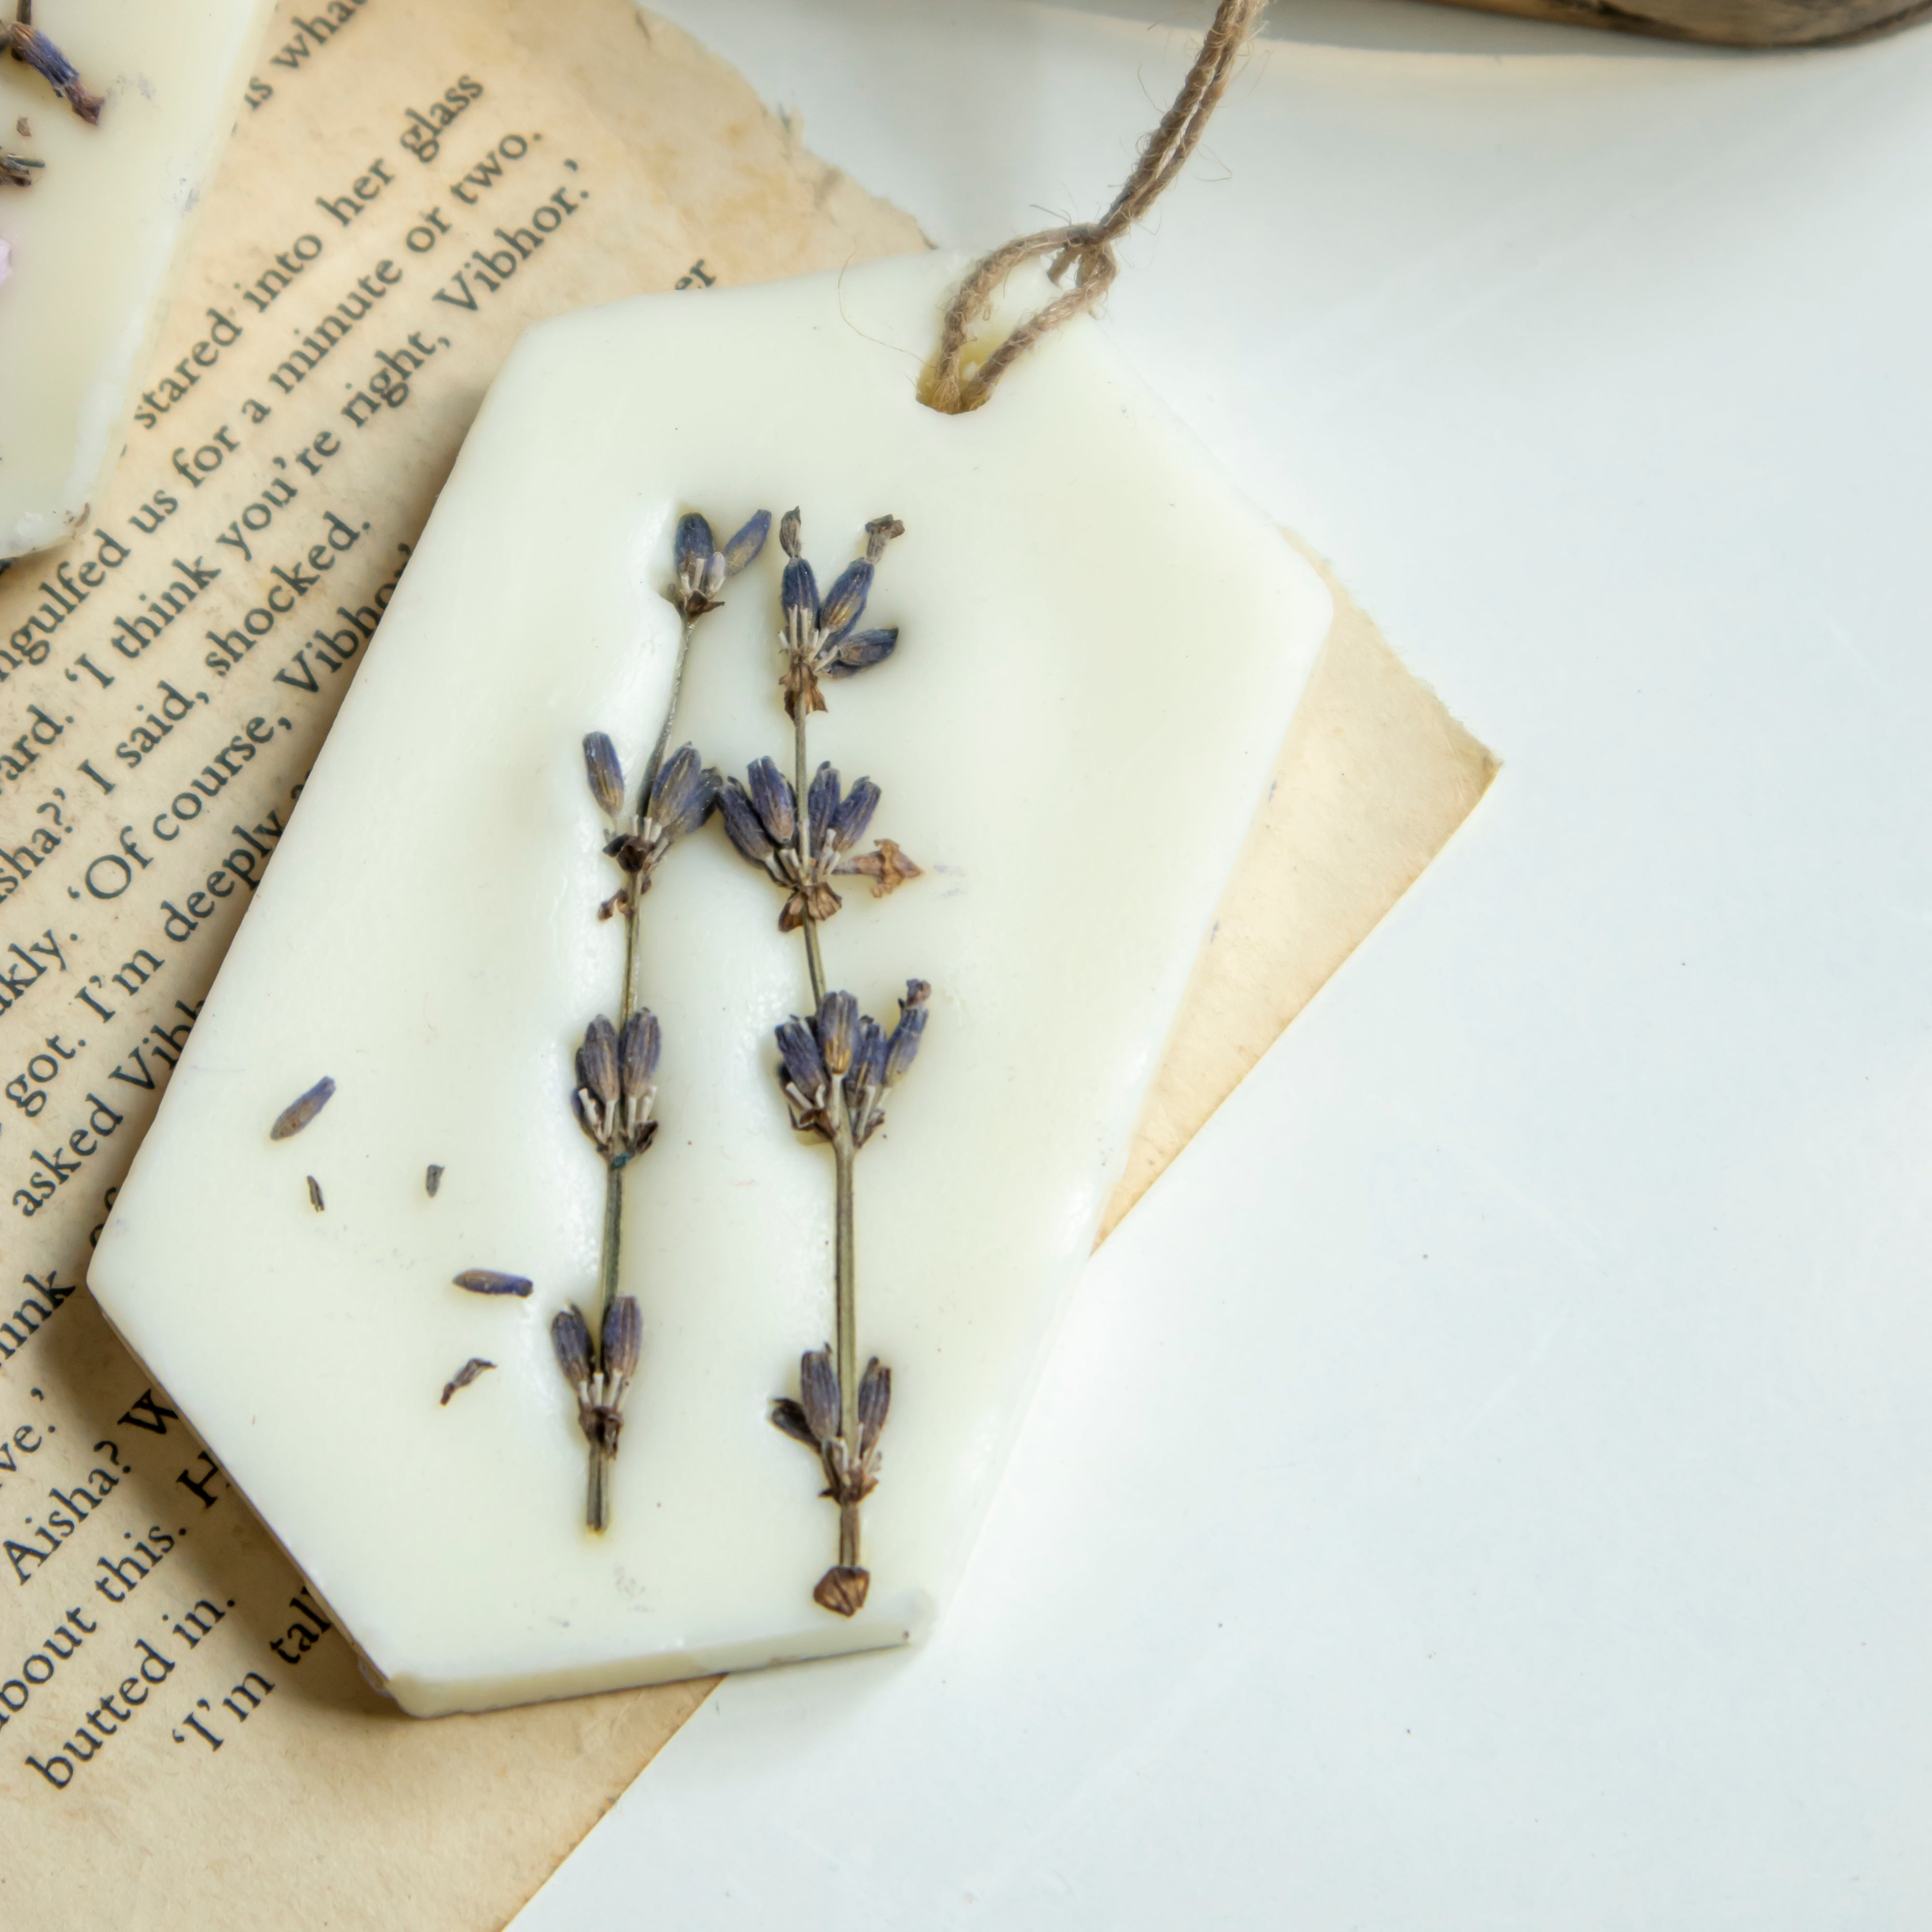 Scented wax tablet: Lavender